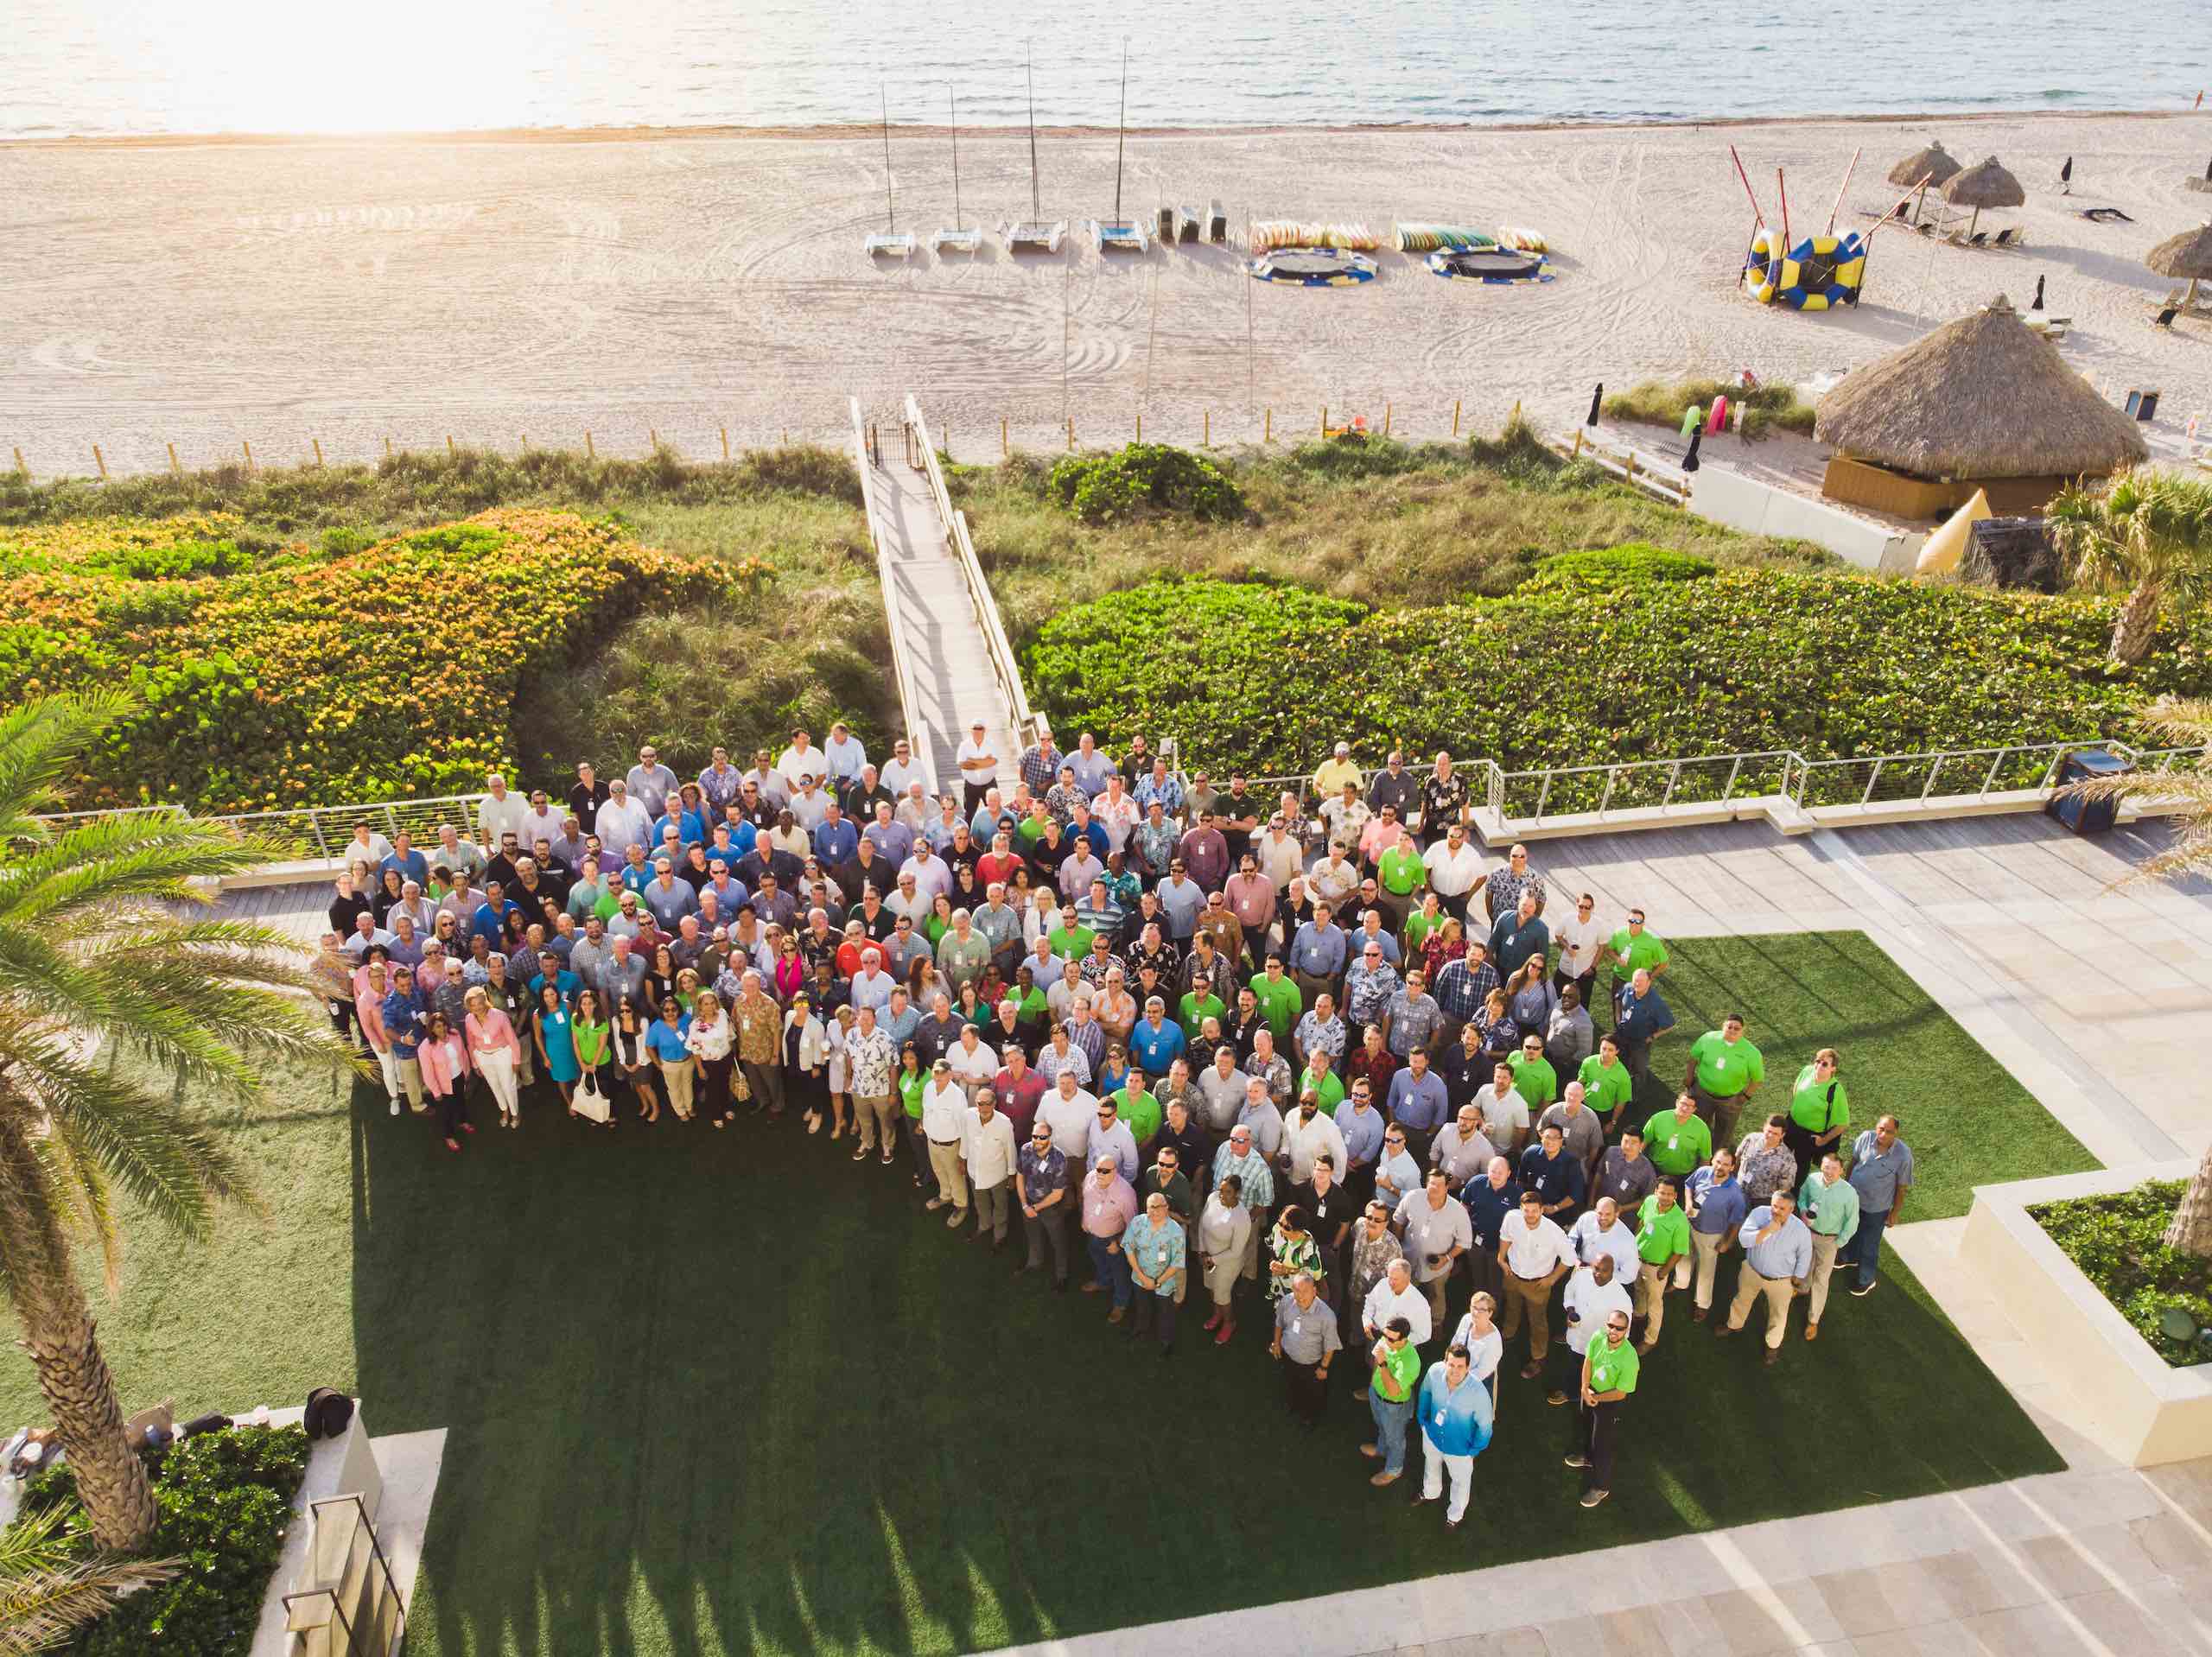 Moss Construction Fort Lauderdale Aerial view of group of people standing on green turf by a beach